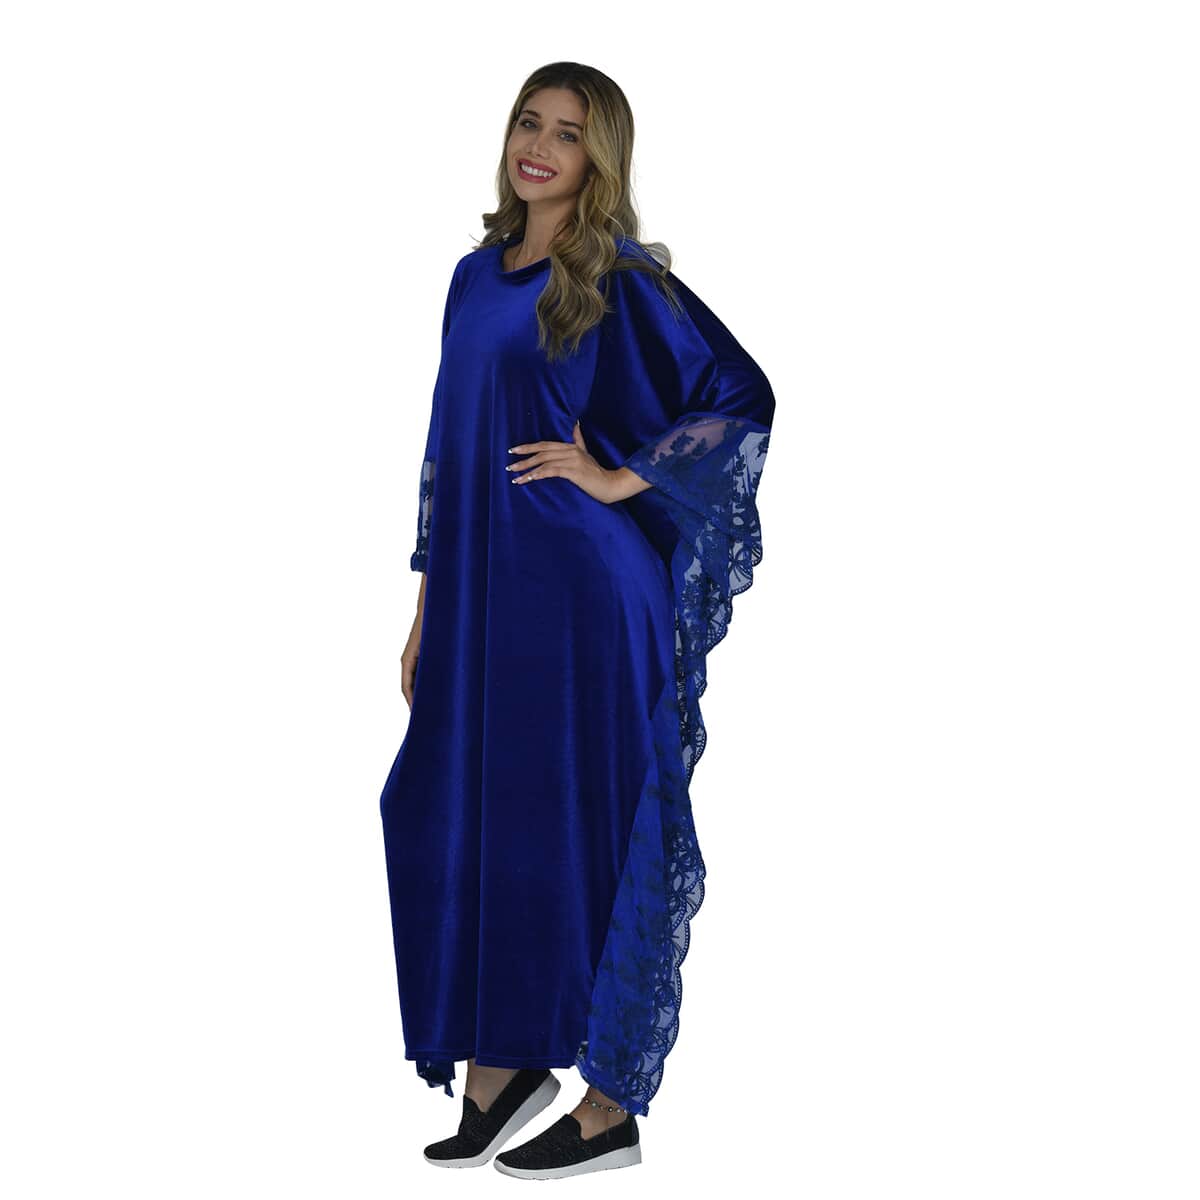 Tamsy Black Label - Lux Stretch Velvet Kaftan with Lace in Royal Blue - One Size Fits Most image number 2